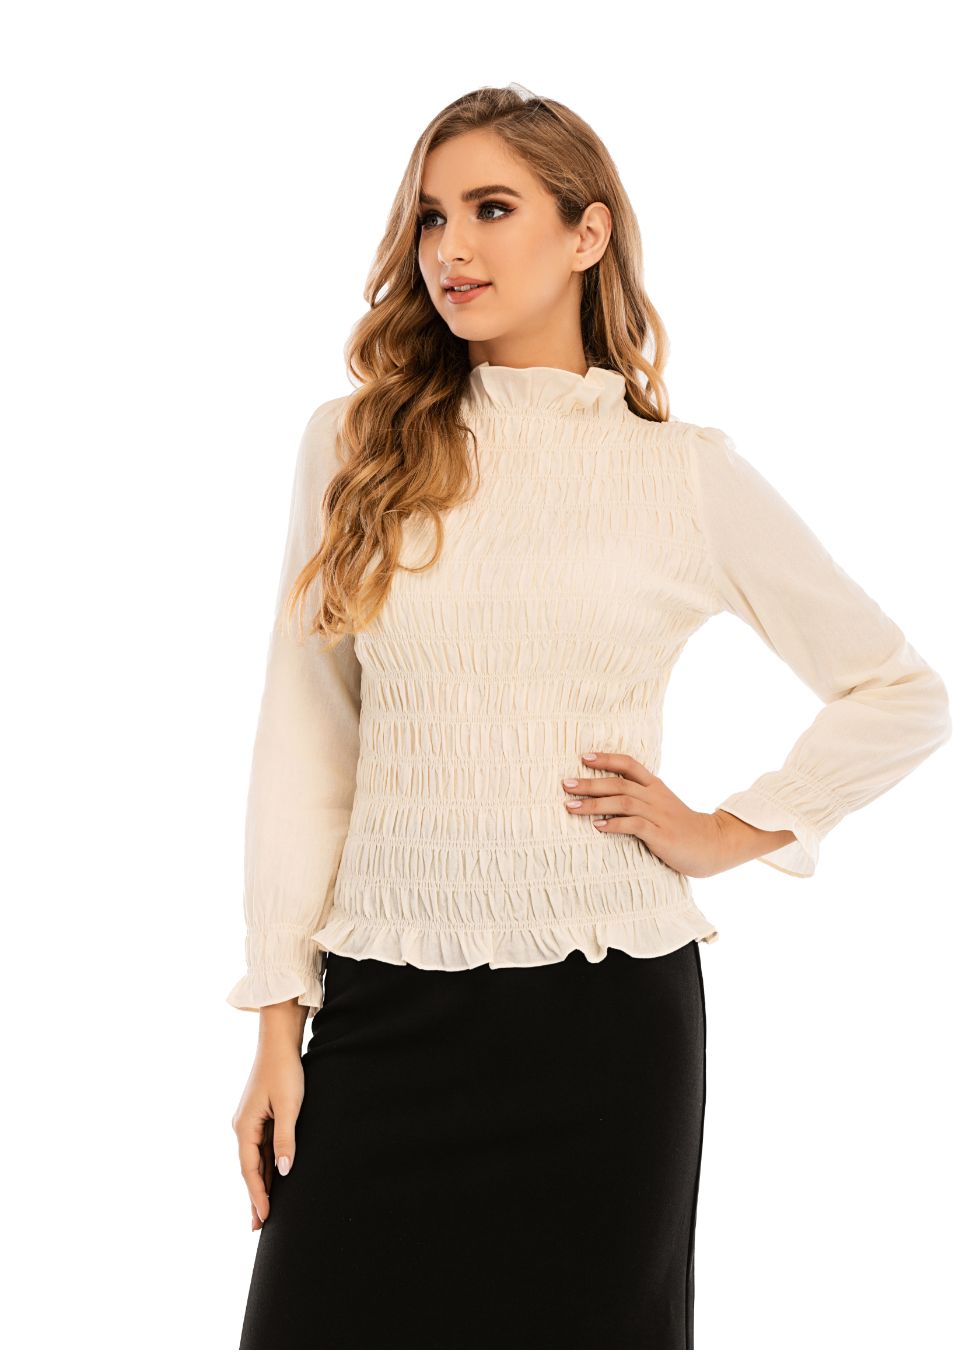 Cotton Spandex Smocked Blouse with Long Sleeves - MissFinchNYC